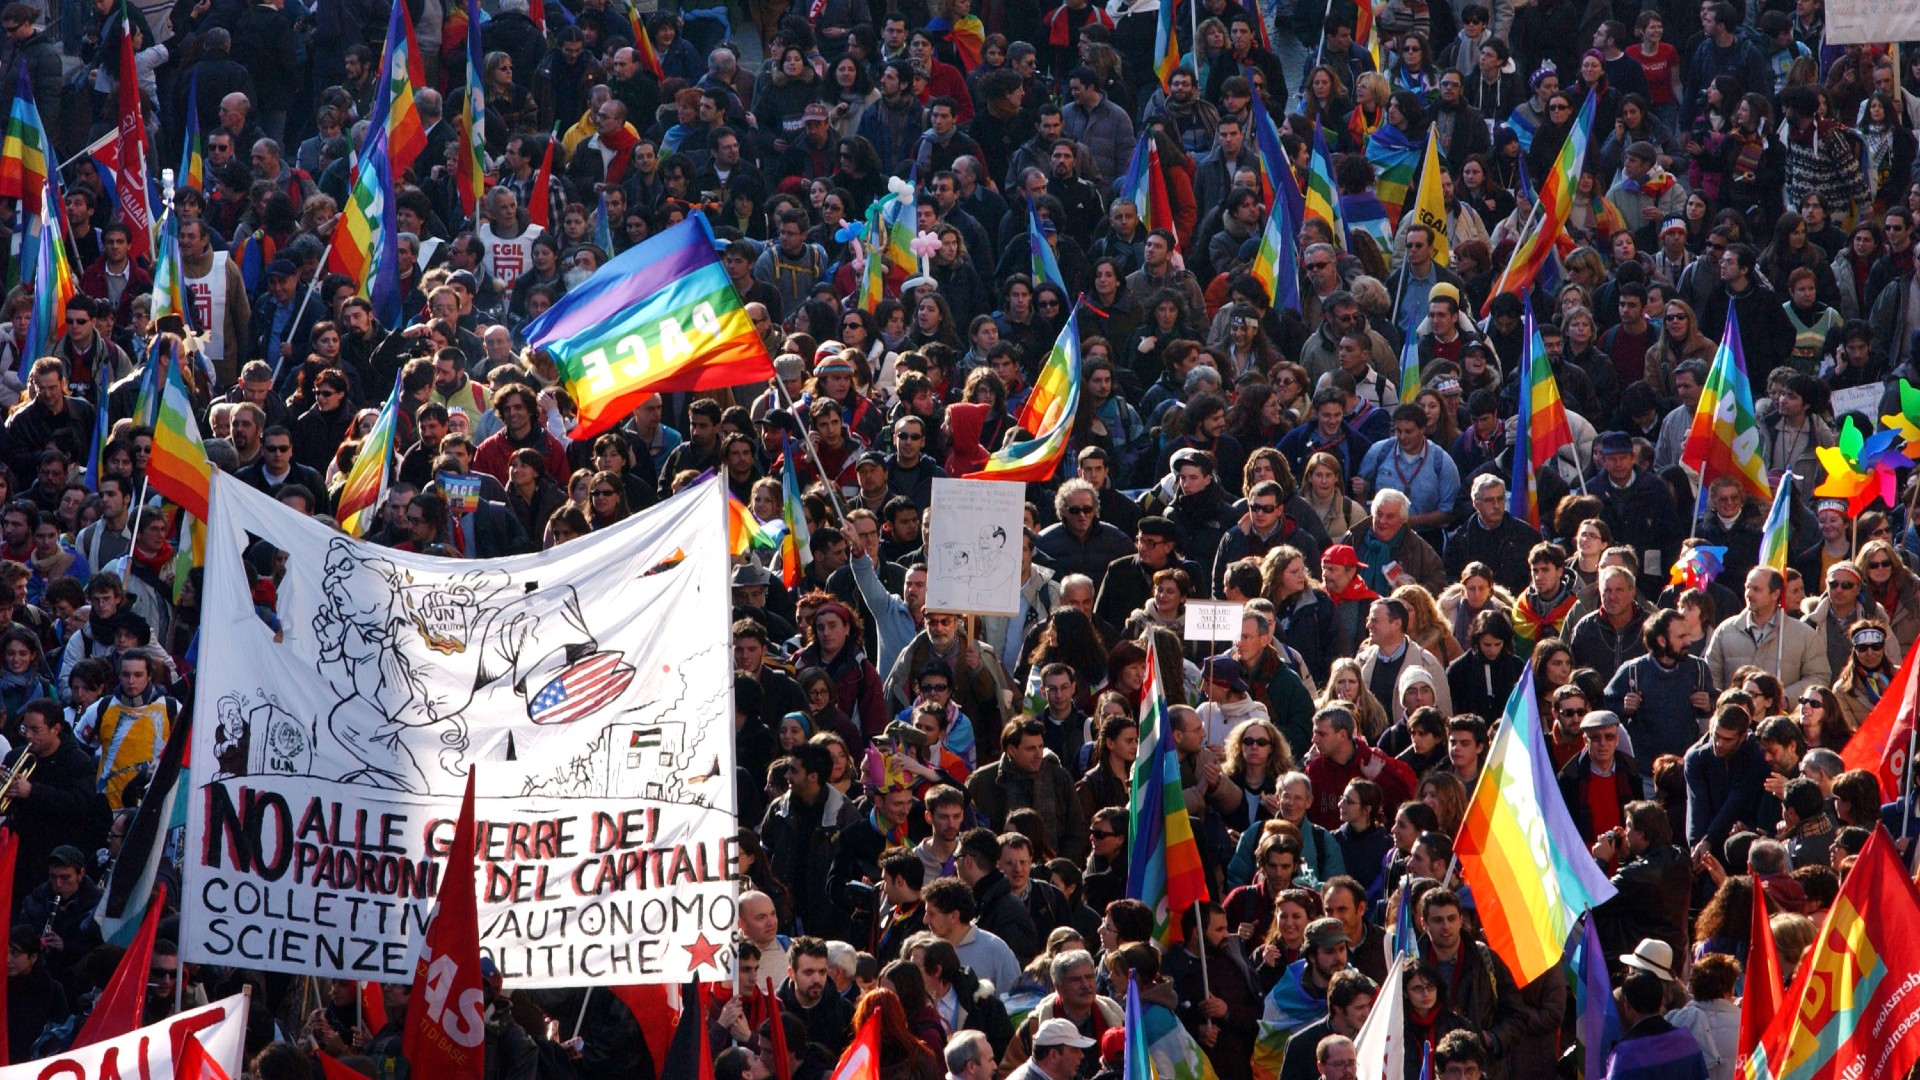 The anti war rally in Rome went into the record books as the biggest ever held